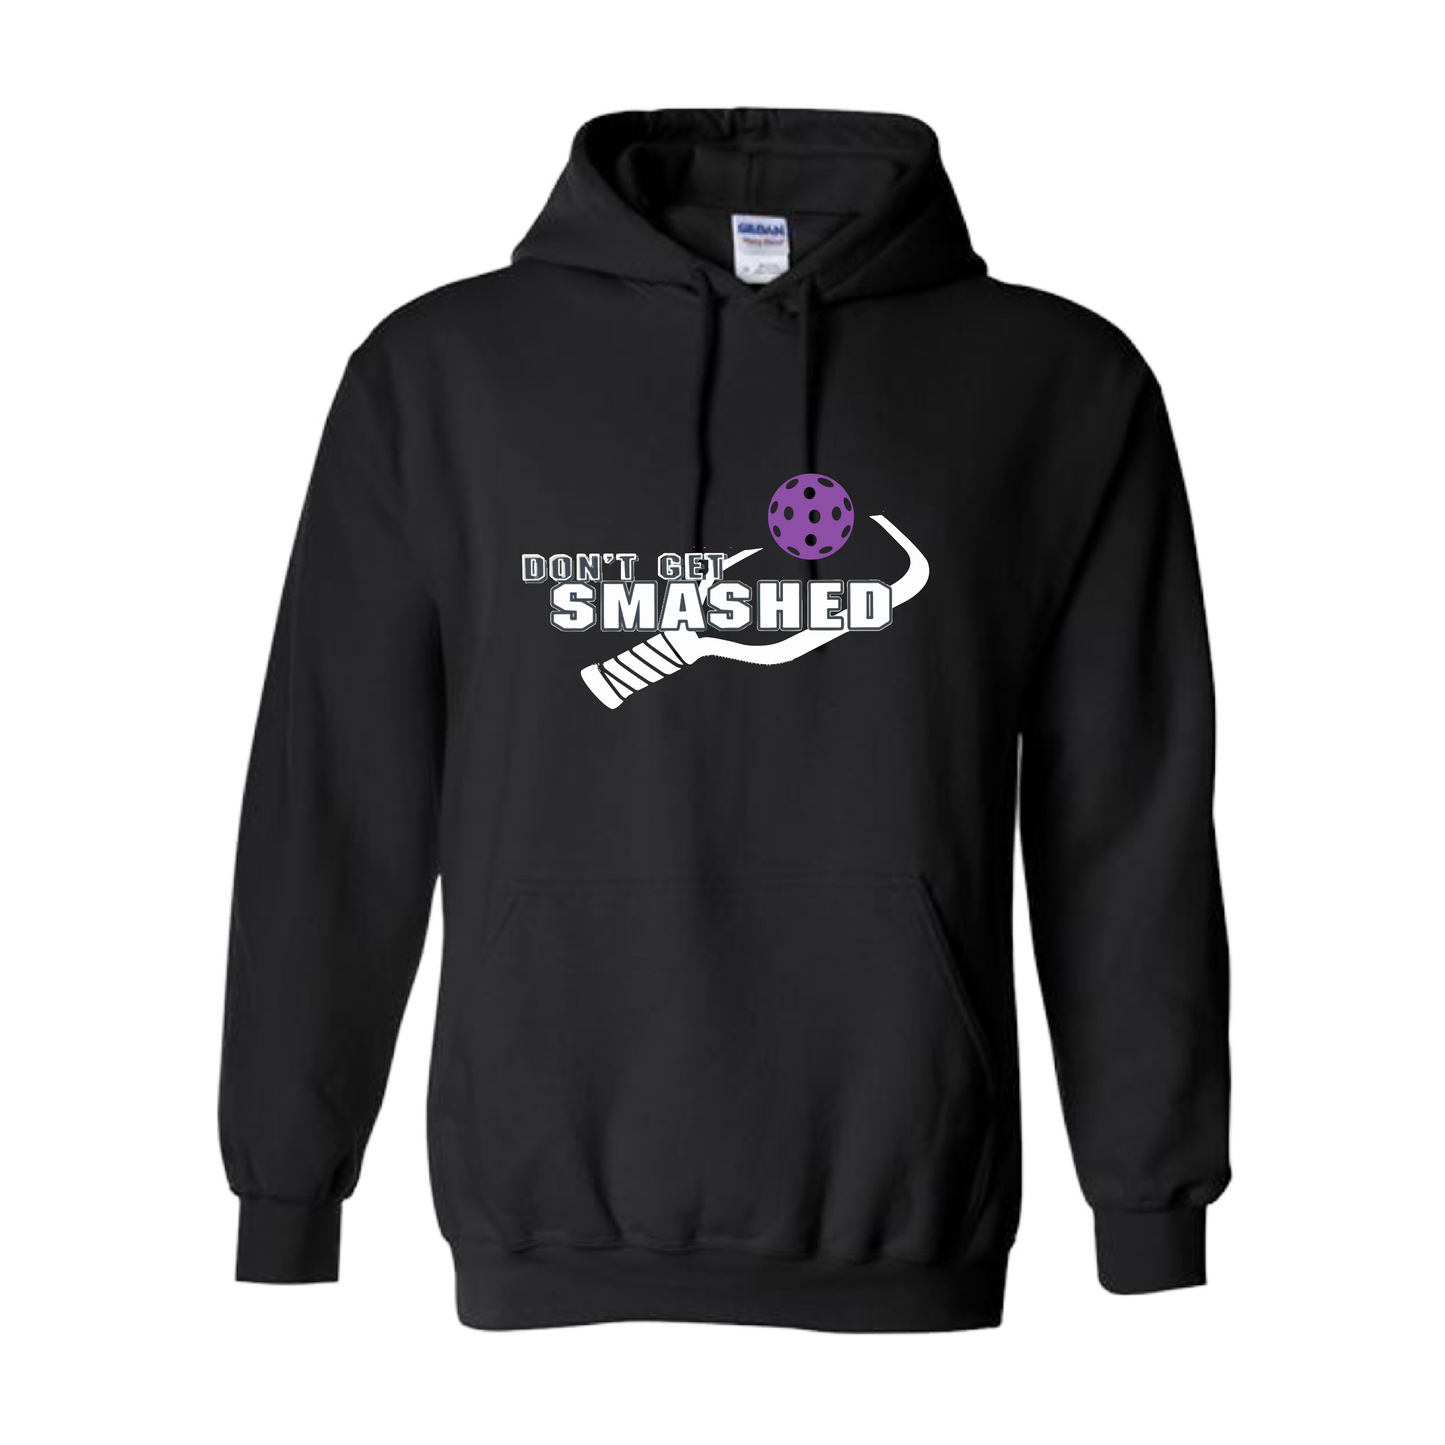 This cozy unisex hoodie will keep you toasty on the Pickleball court - soft, ultra-comfortable, and moisture-wicking with a double-lined hood and front pouch pocket. Get ready to be the star of the game with this eye-catching piece of apparel!